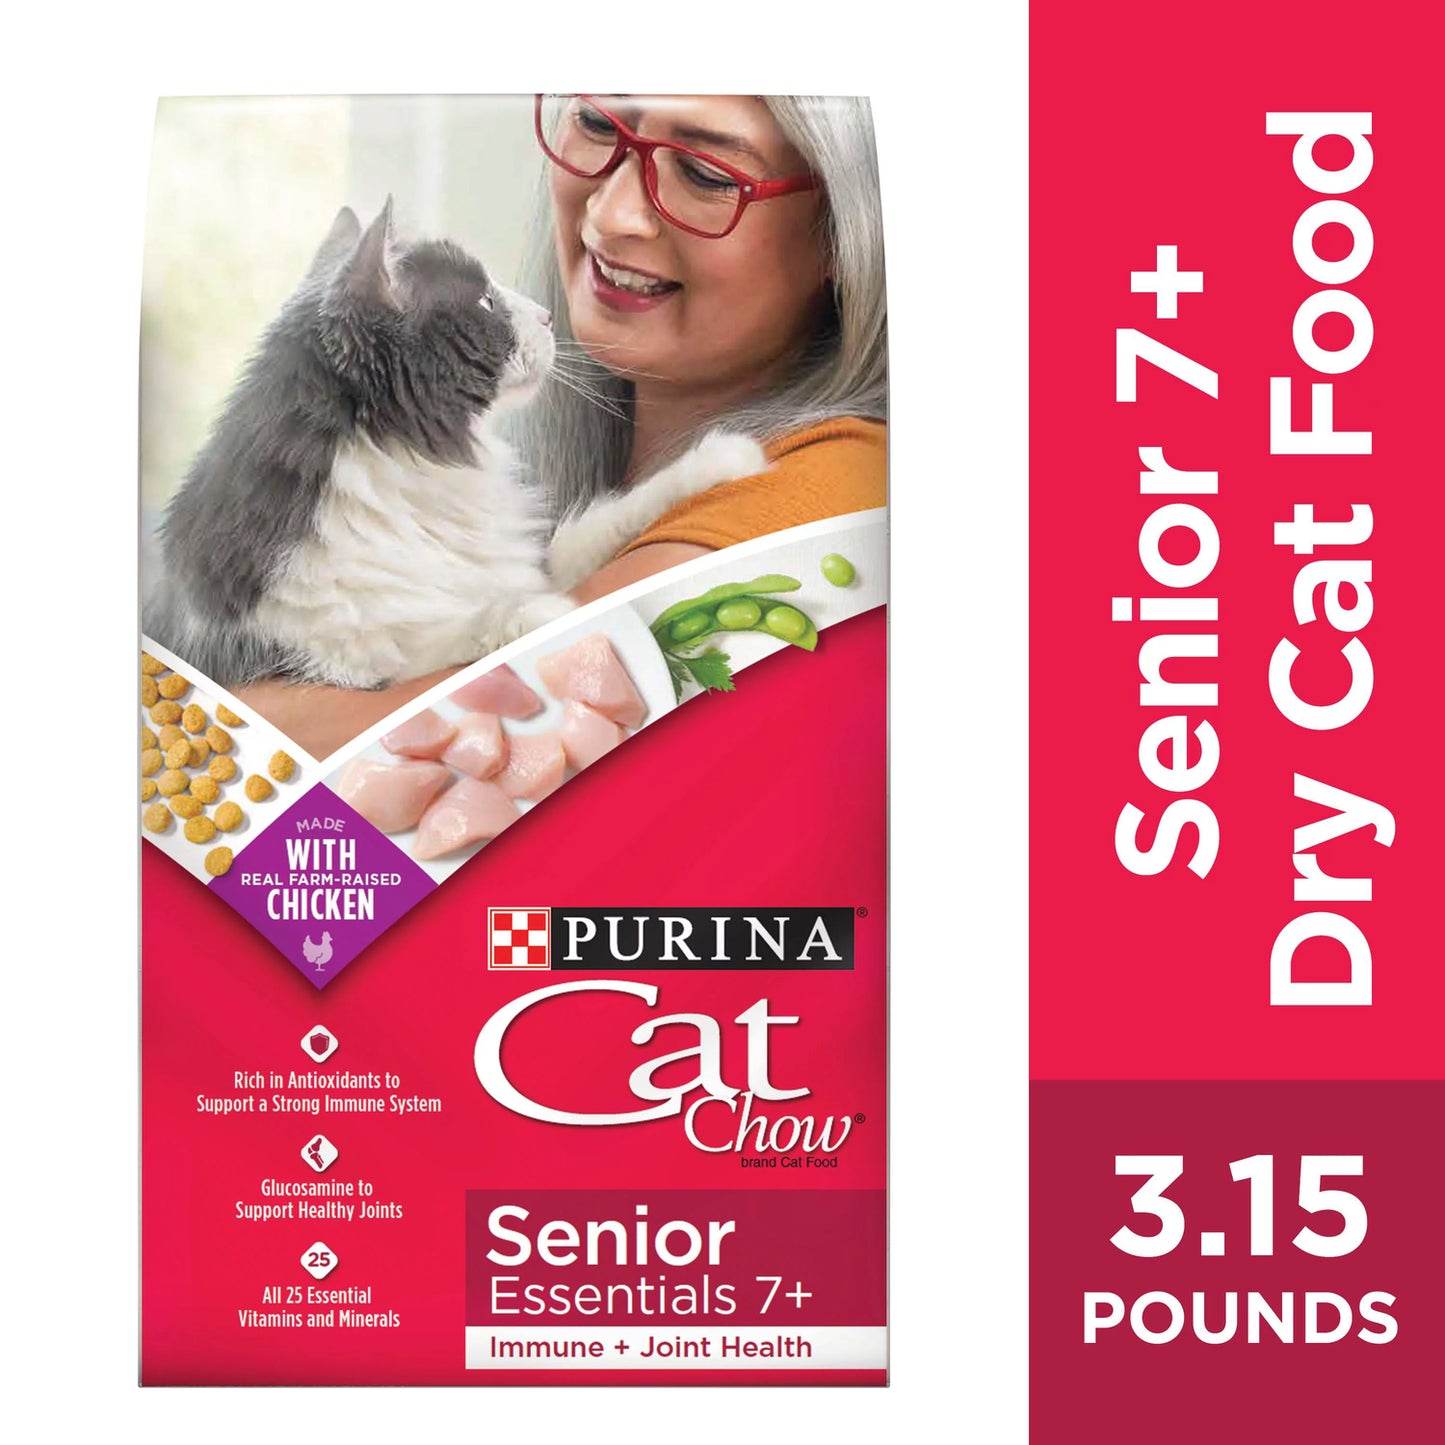 Cat Chow Chicken Flavor Dry Cat Food for Senior, 3.15 Lb. Bag